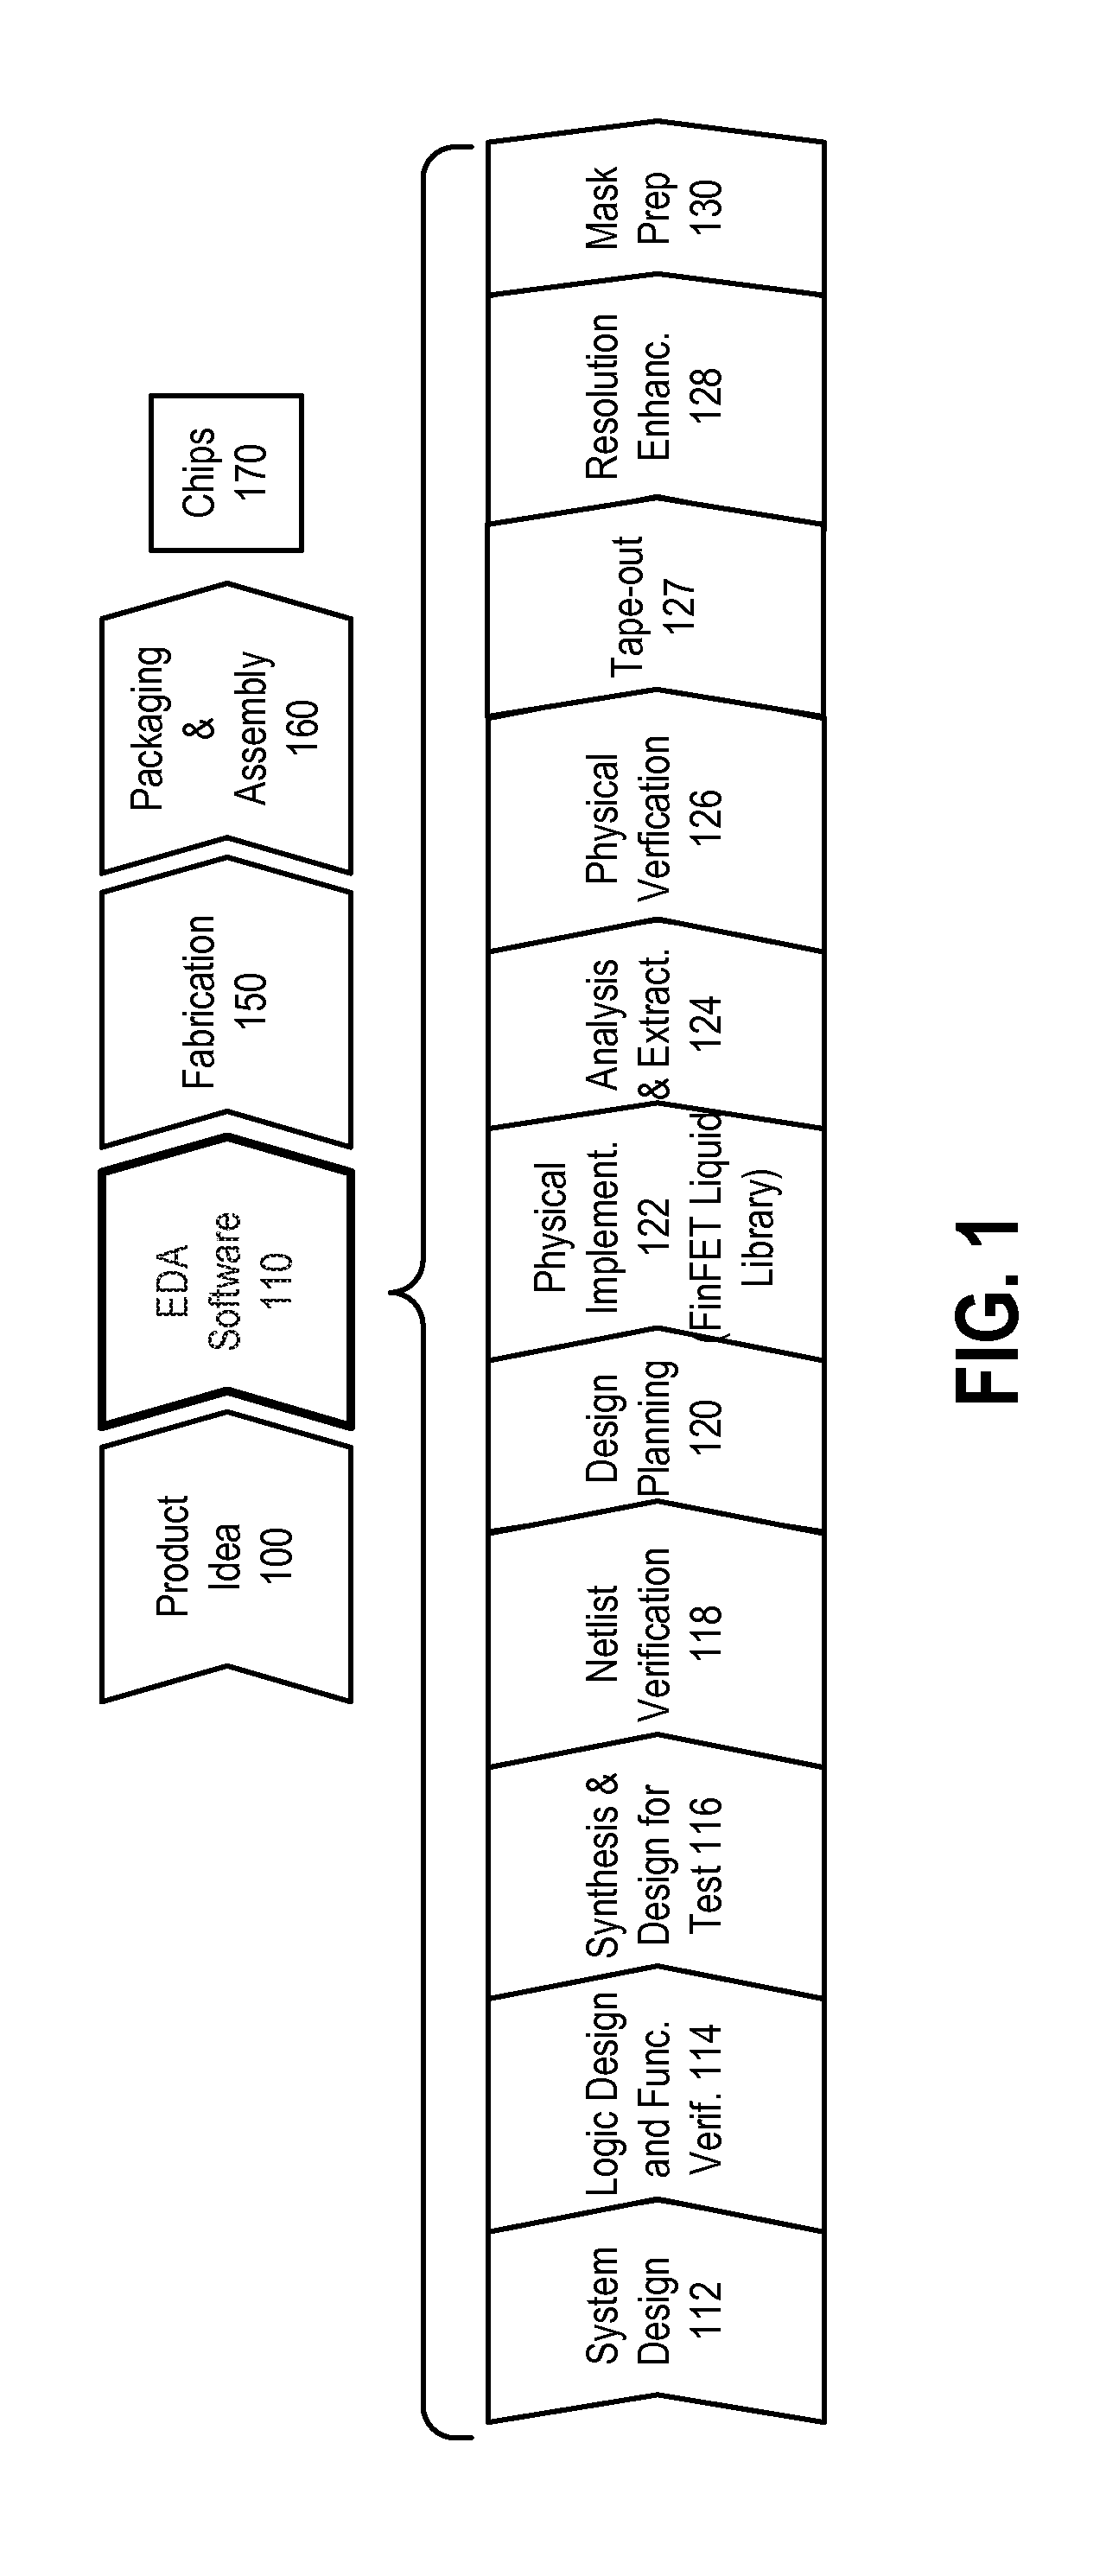 N-channel and p-channel finfet cell architecture with inter-block insulator